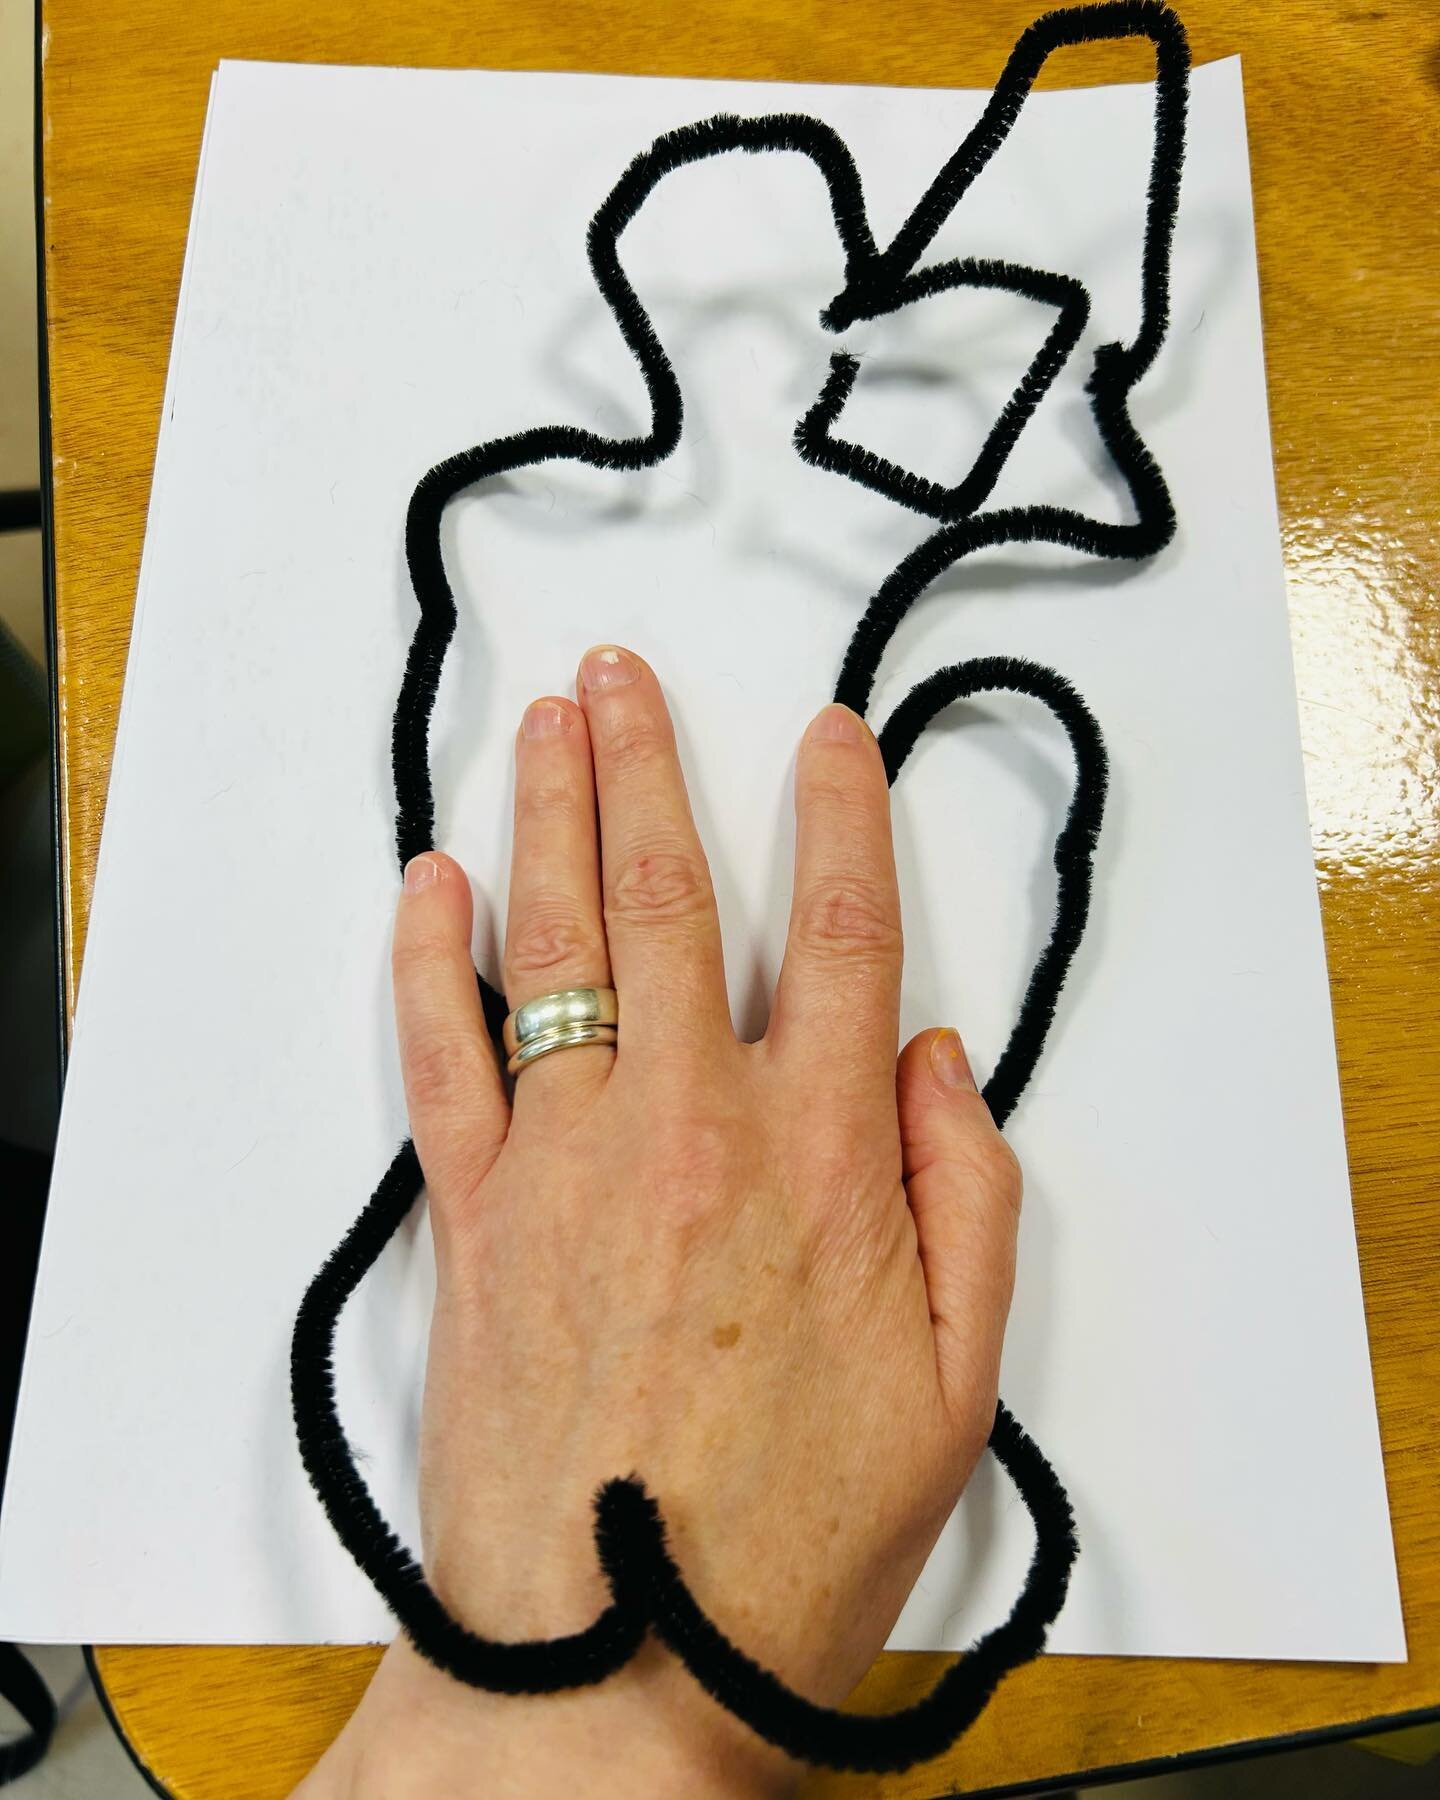 My responses to an alternative, 3D, experimental life drawing workshop today - Life Forms - run by @sam____lucas @fra_beecher @explorist_2 

I was trying out ways of bringing in my idea of creating self portraits using my hand, but instead using my h